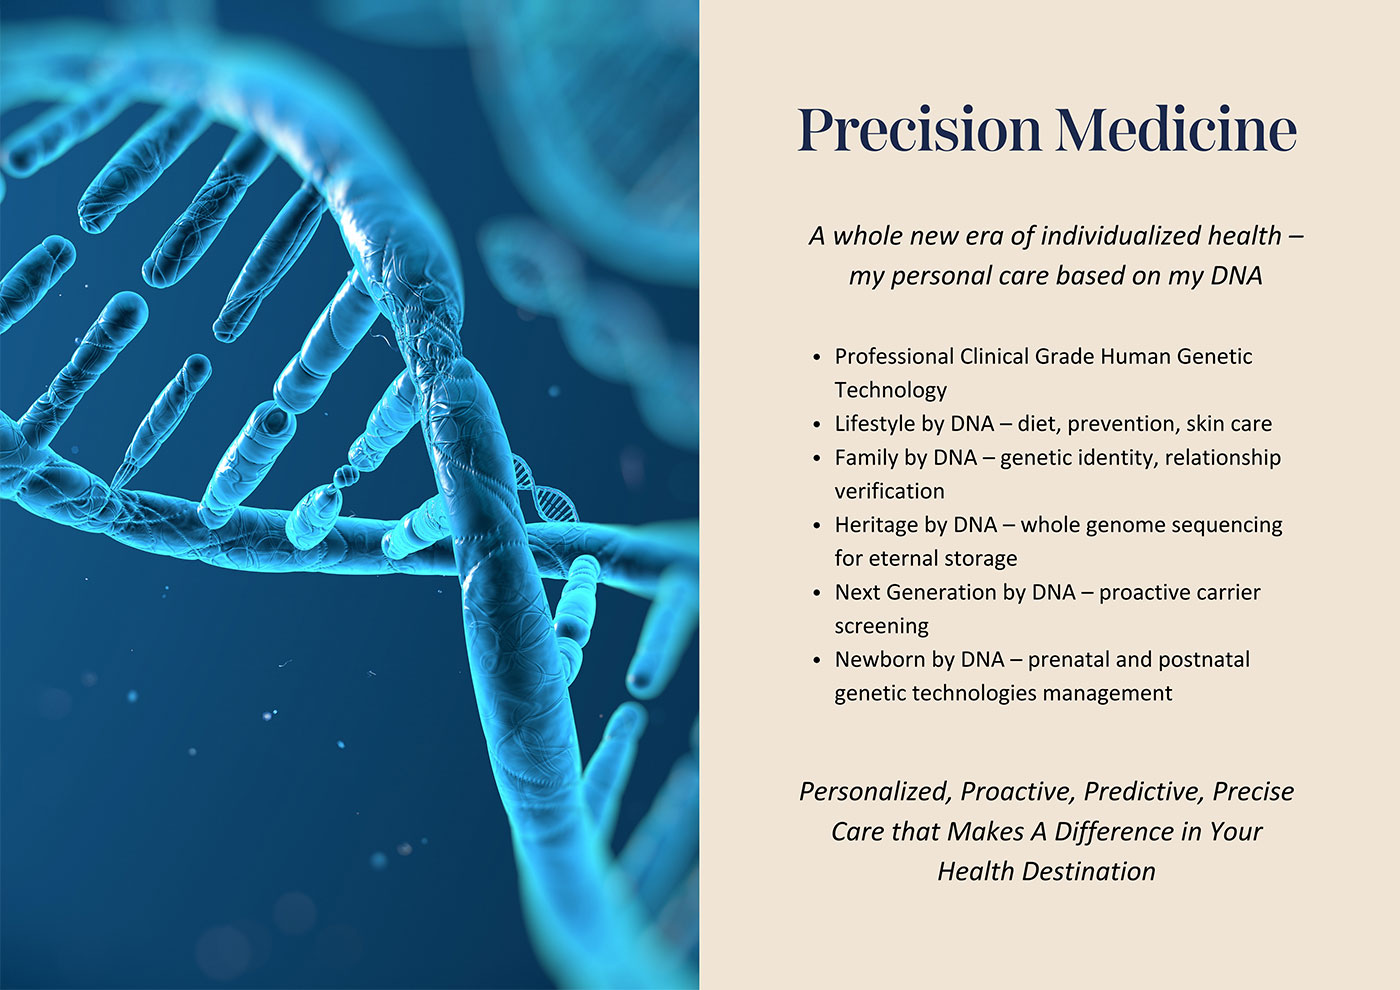 Precision Medicine! Professional Clinical Grade Human Genetic Technology, Lifestyle by DNA – diet, prevention, skin care, Family by DNA – genetic identity, relationship verification, Heritage by DNA – whole genome sequencing for eternal storage, Next Generation by DNA – proactive carrier screening, Newborn by DNA – prenatal and postnatal genetic technologies management, Personalized, Proactive, Predictive, Precise Care that Makes A Difference in Your Health Destination